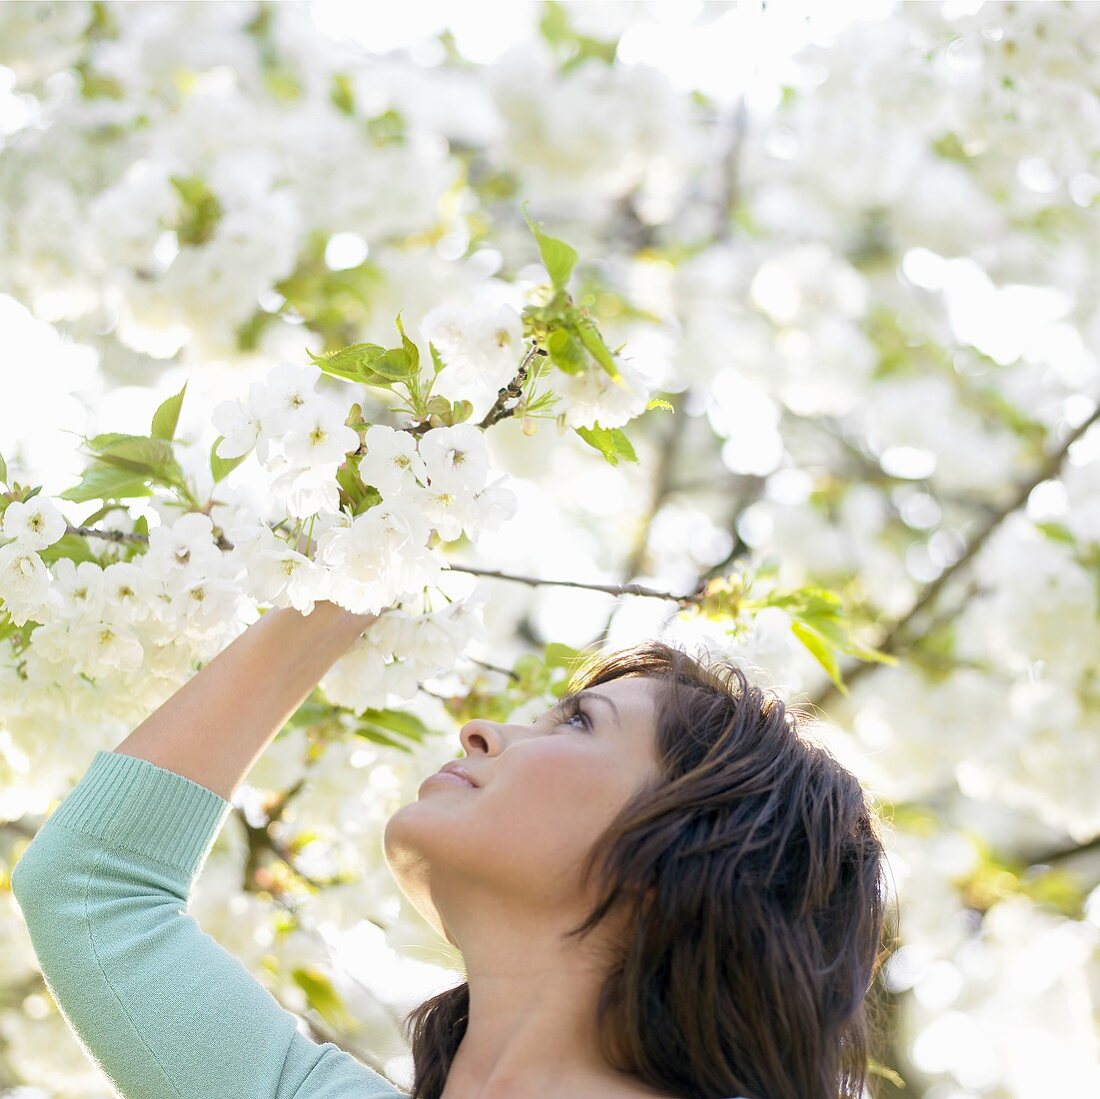 Woman smelling white blossom on tree